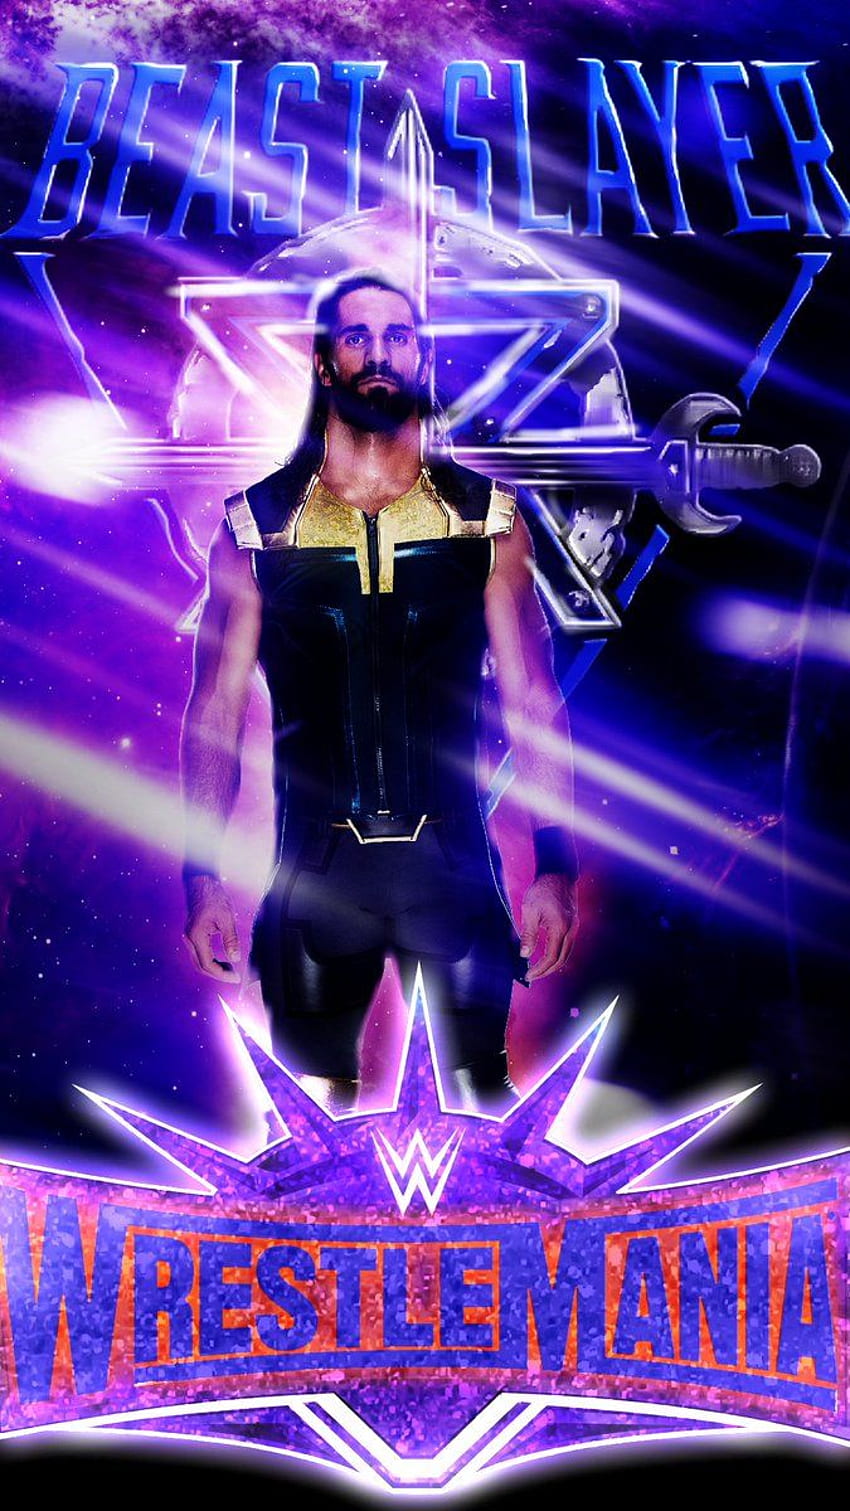 Seth Rollins Wallpaper APK for Android Download